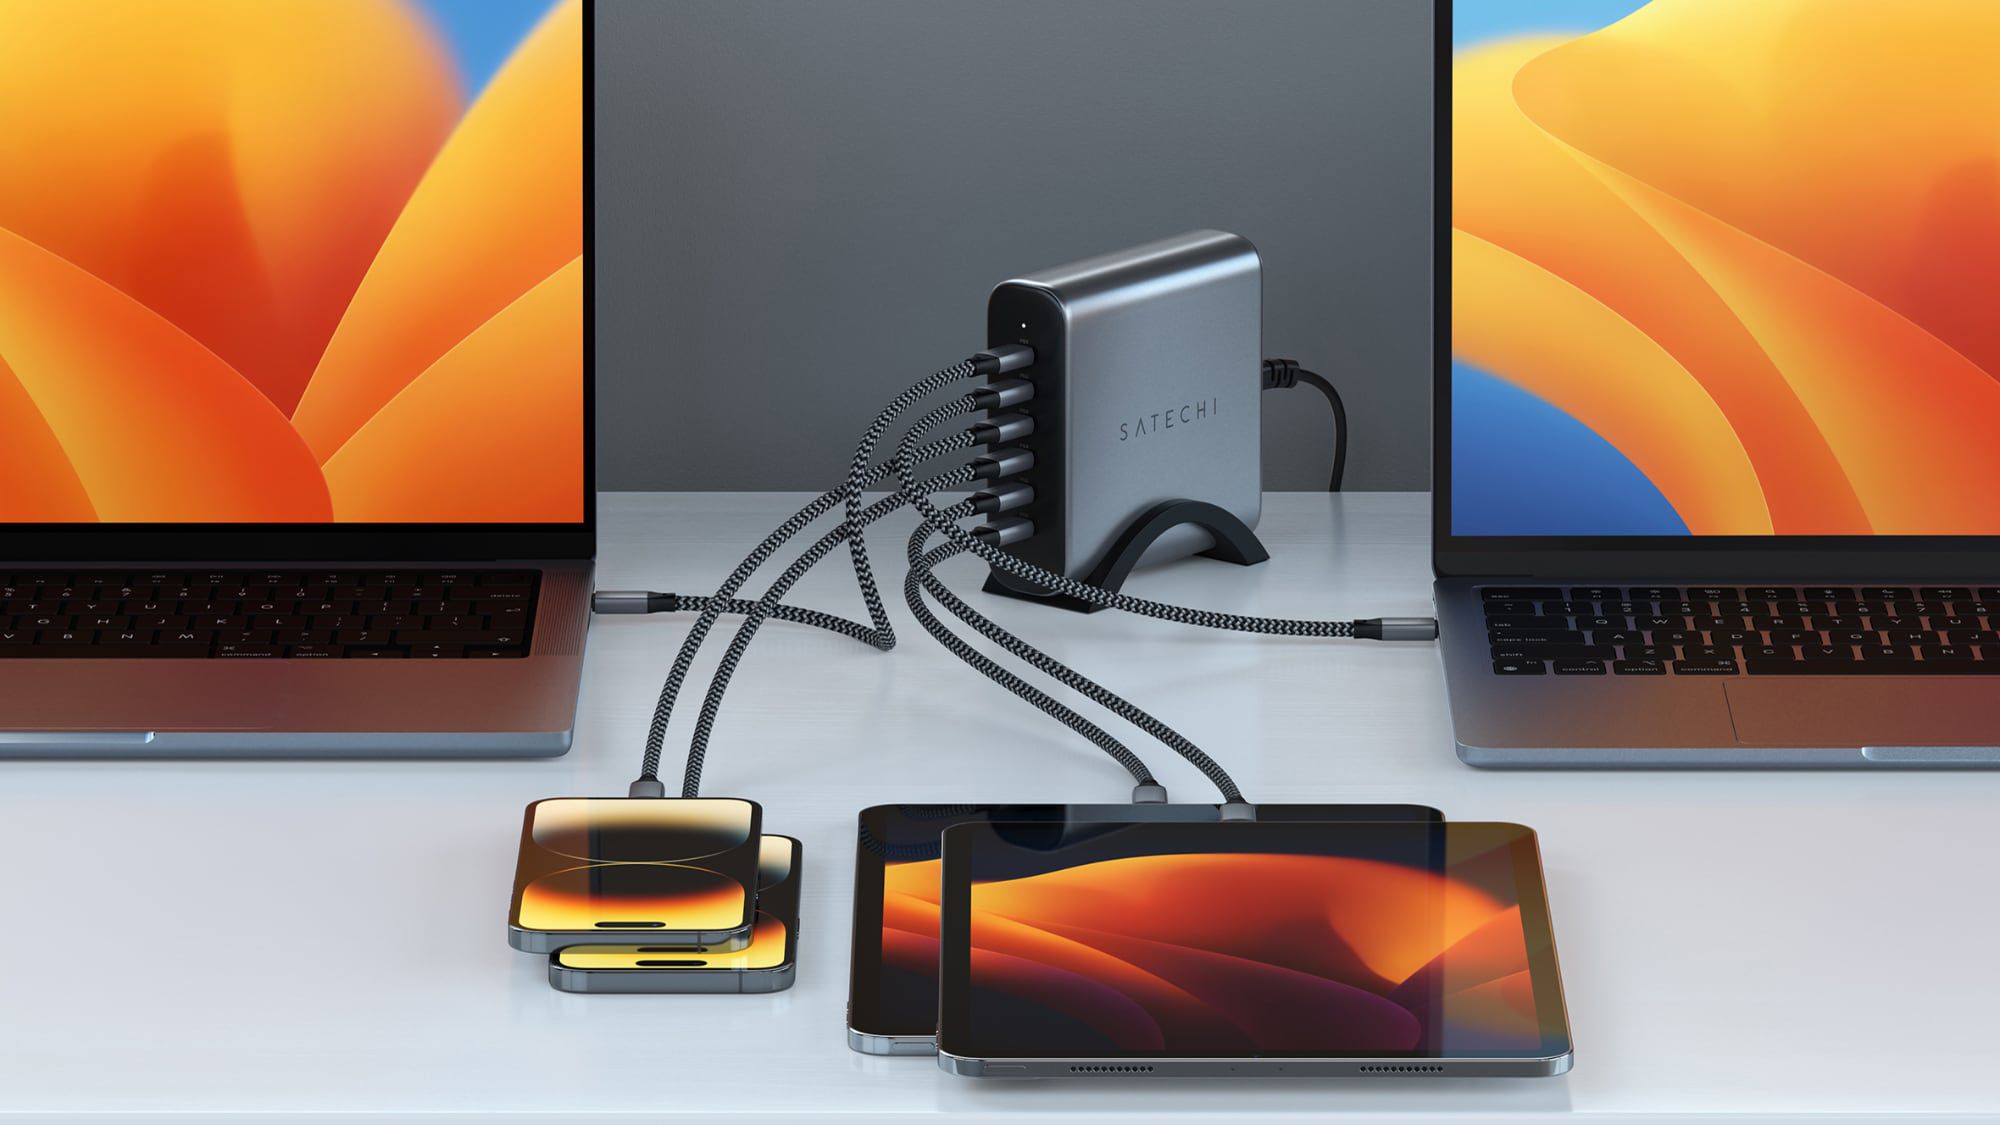 CES 2023: Satechi Debuts 200W 6-Port Charger and Thunderbolt 4 Slim Hub